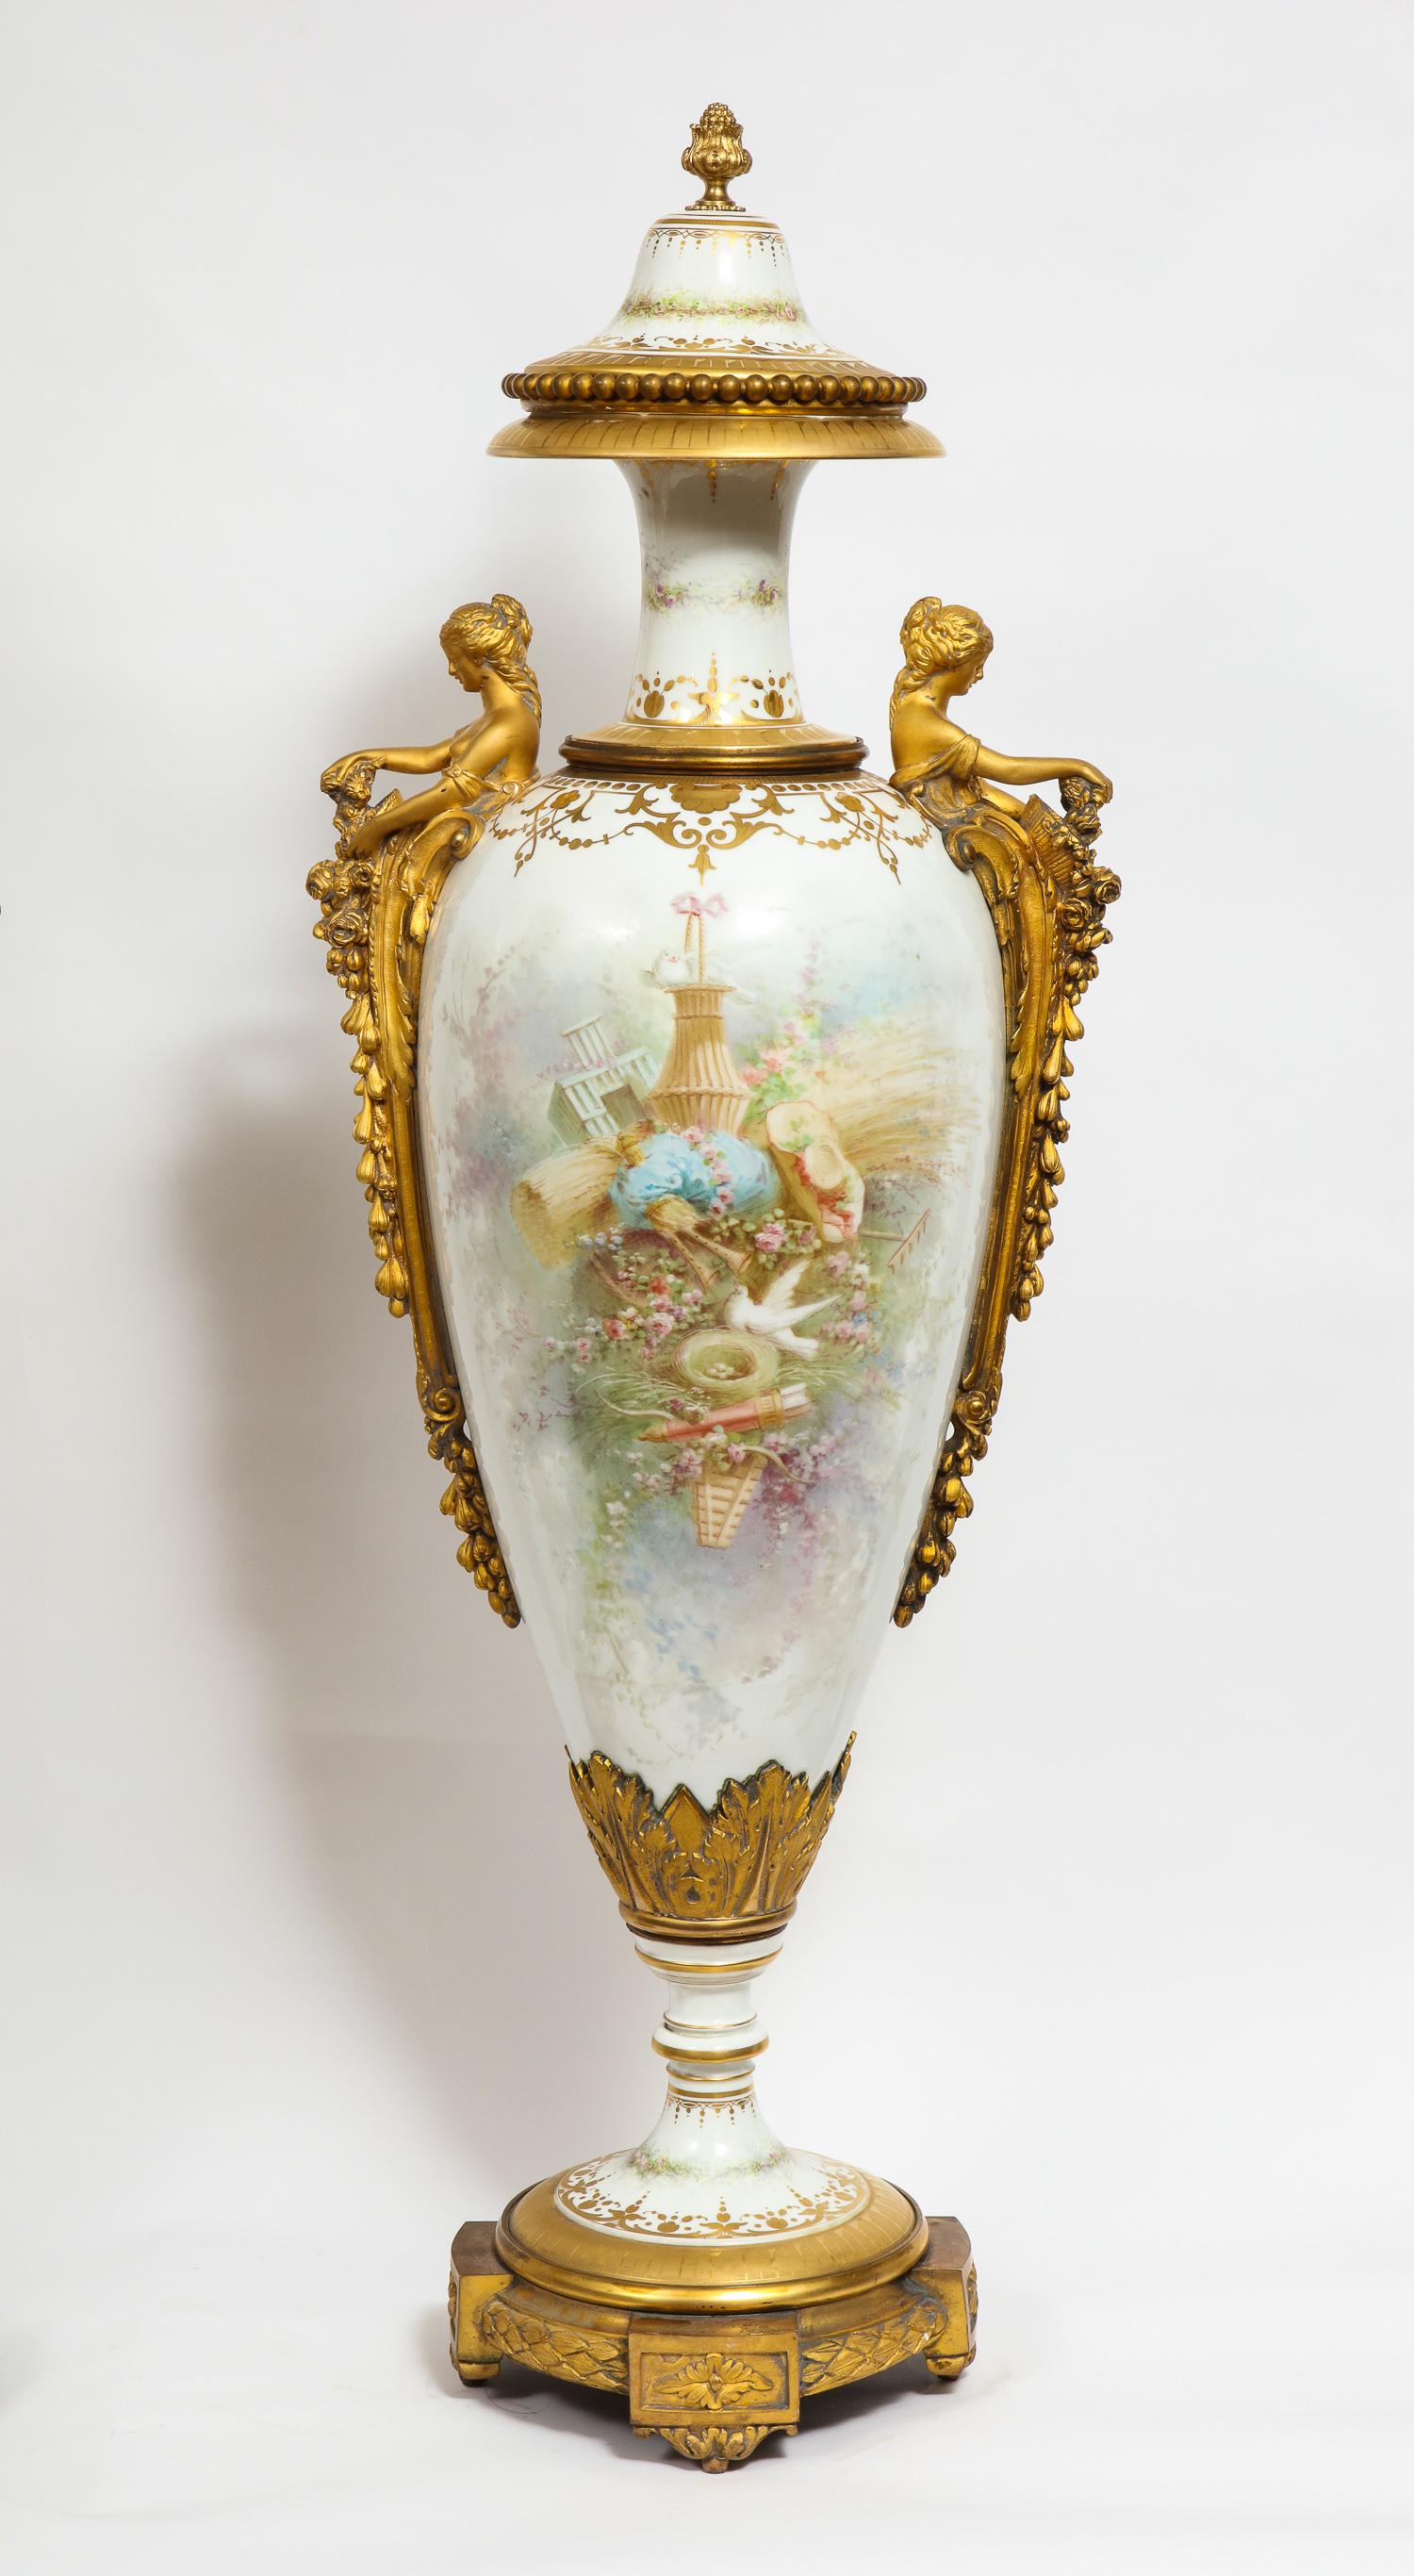 Monumental Pair of French Ormolu-Mounted White Sèvres Porcelain Vases and Covers 5